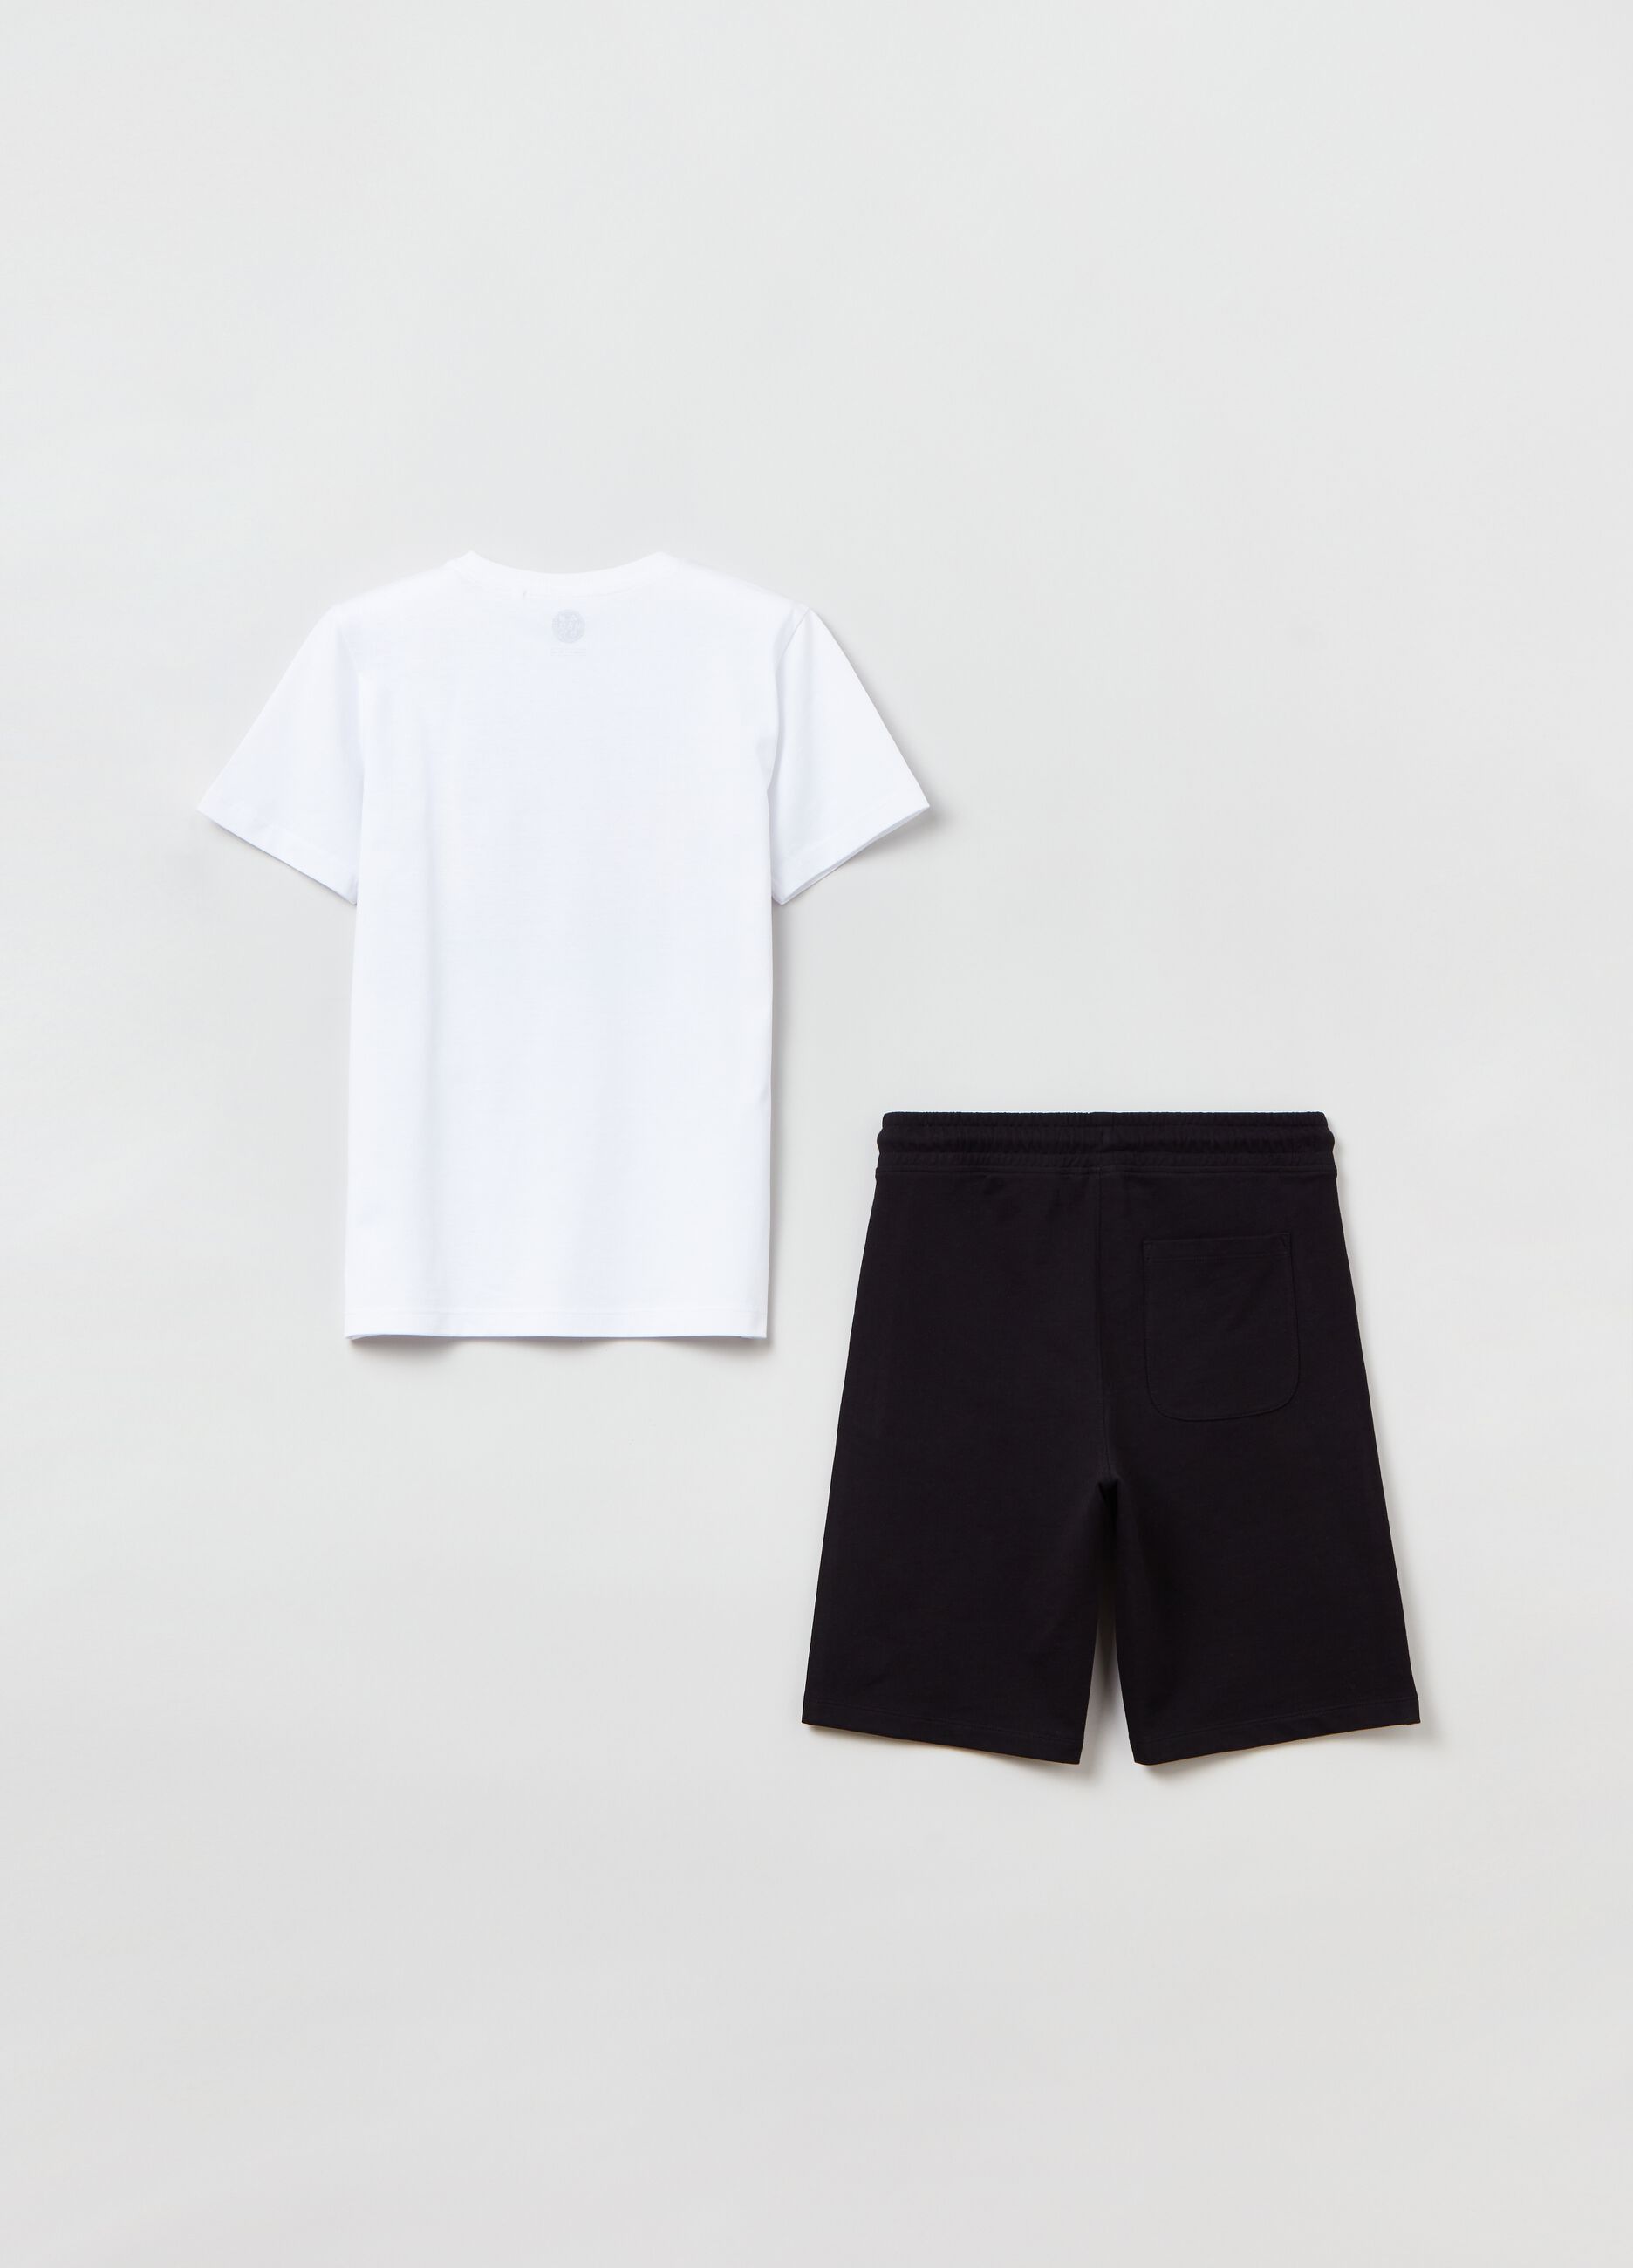 Cotton jogging set by Maui and Sons